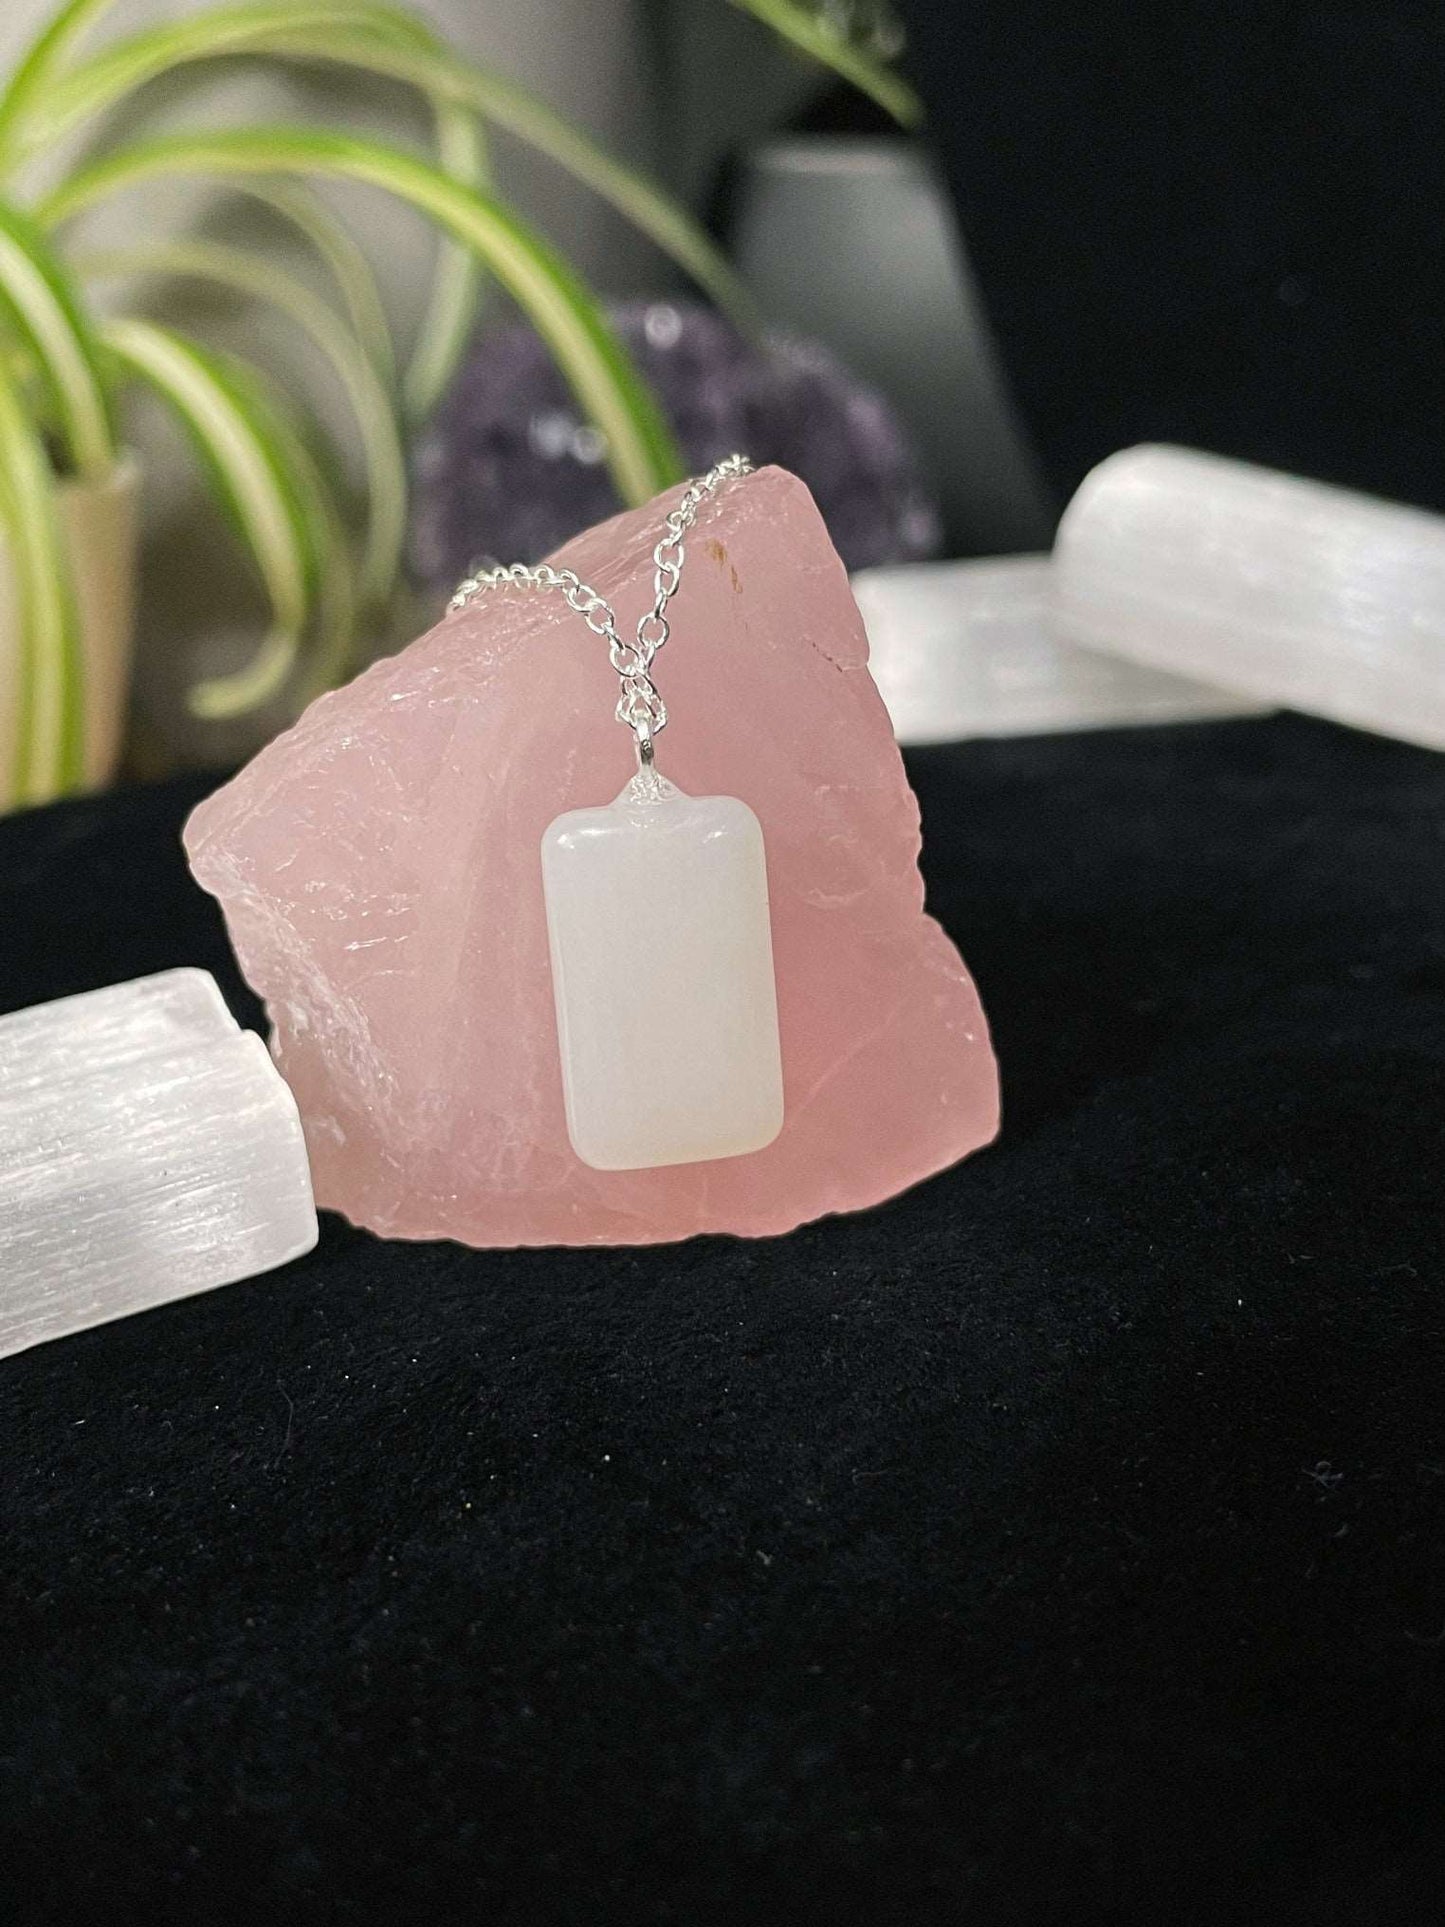 Genuine White Jade Necklace - The Wandering Fox Emporium, Your Crystal Store